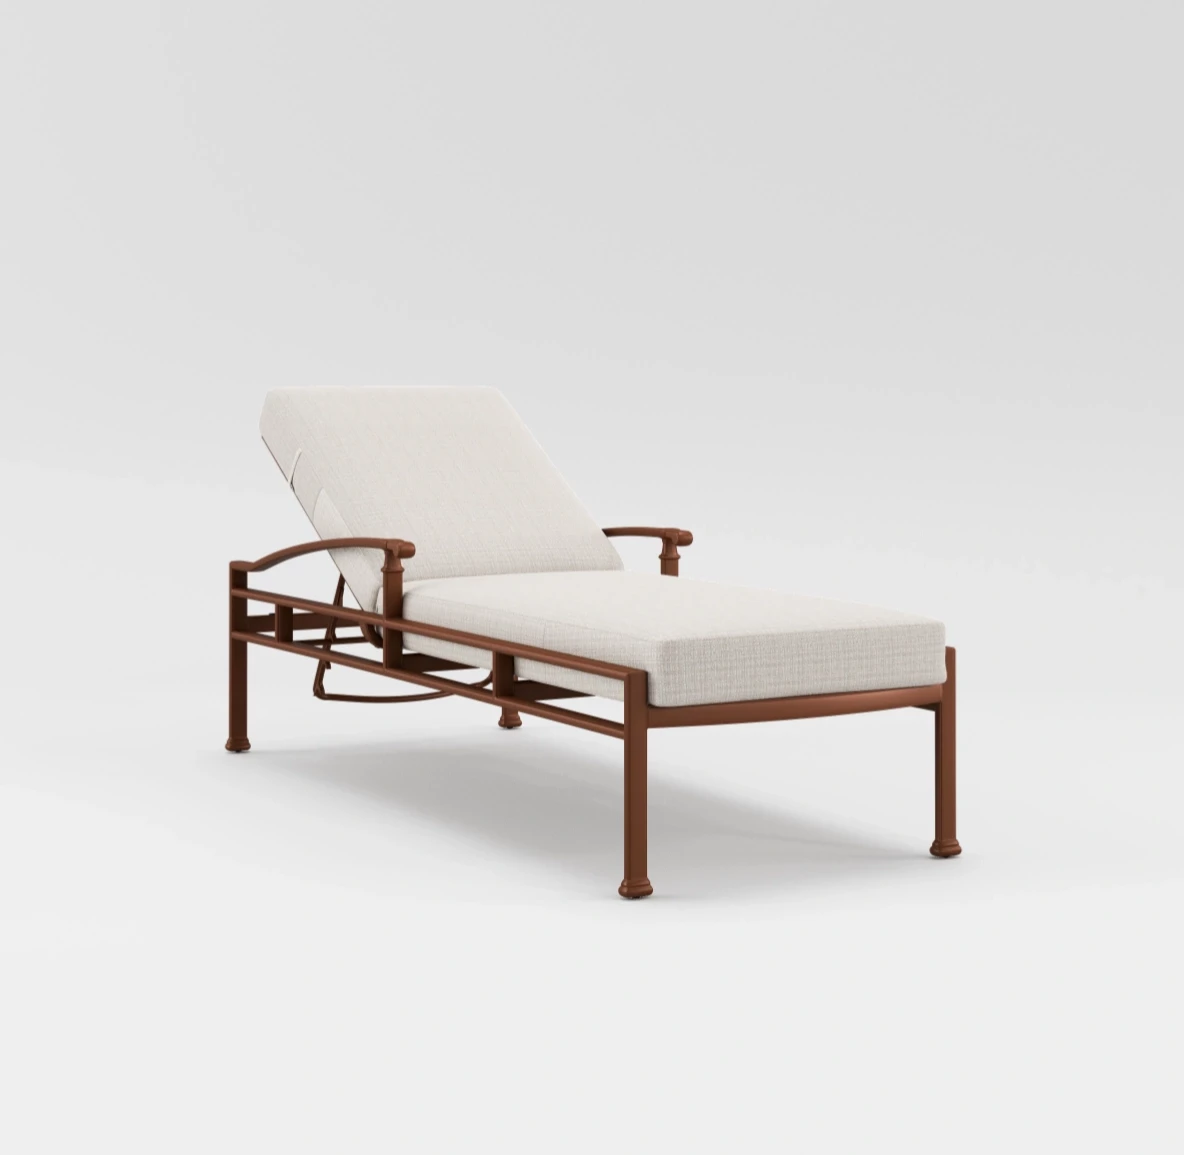 Fremont Cushion Chaise Lounge by Brown Jordan